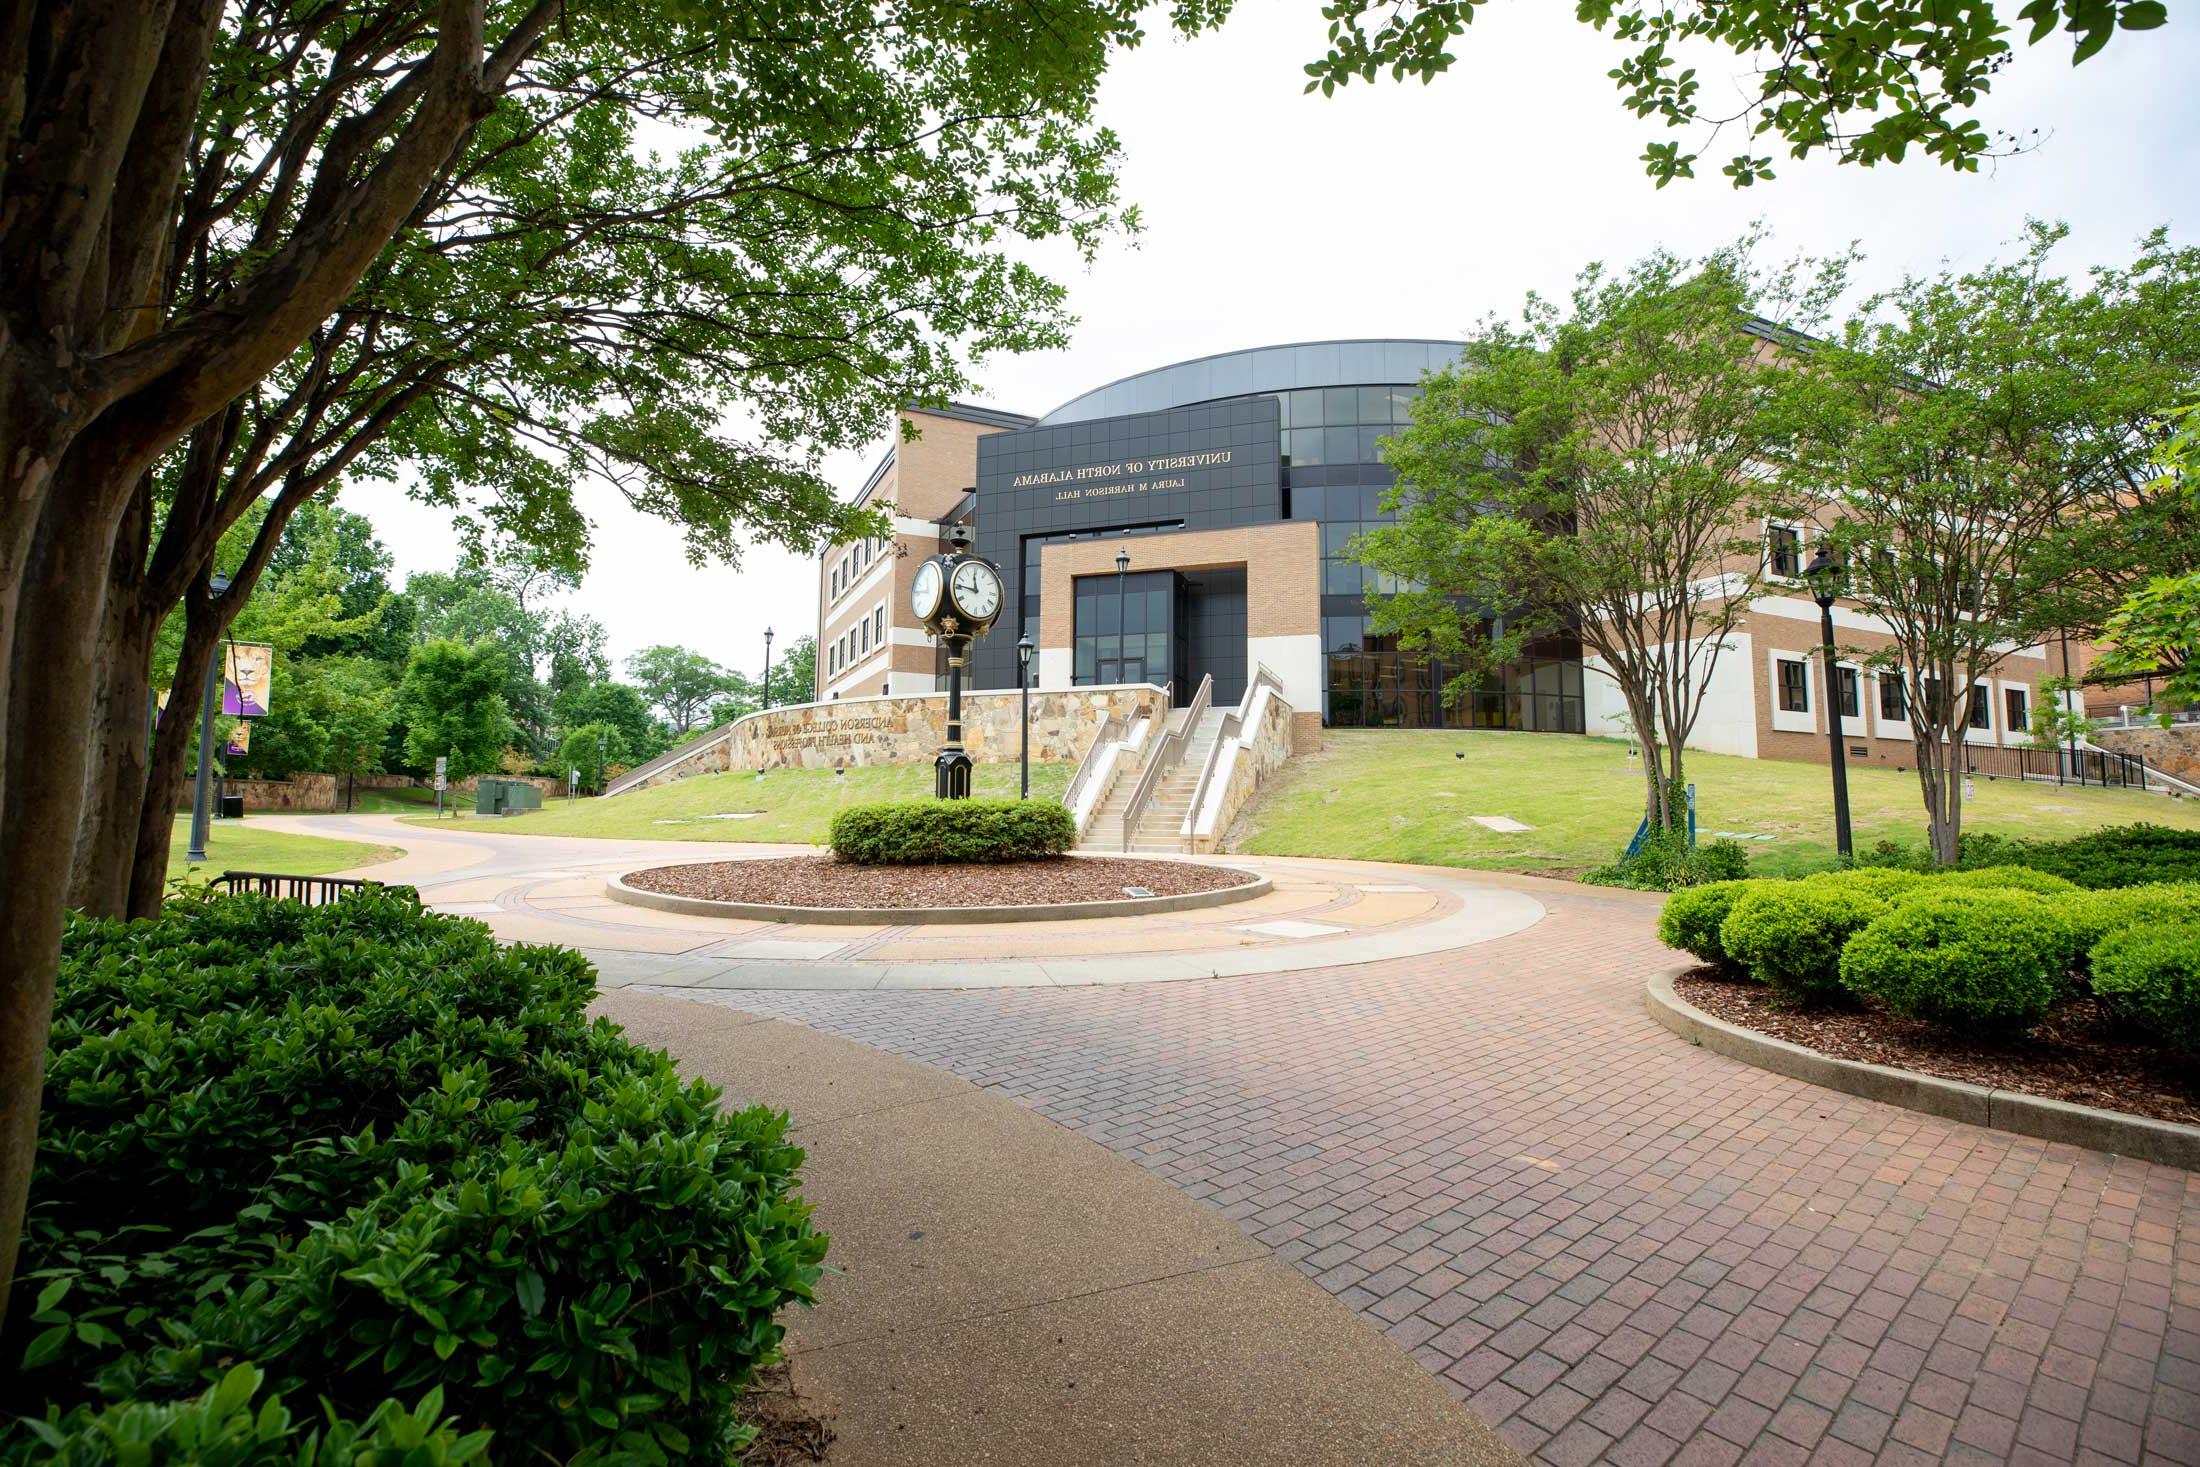 Healthcare Heroes Plaza at the University of North Alabama is designed to honor UNA alumni and friends in healthcare and healthcare-related fields.